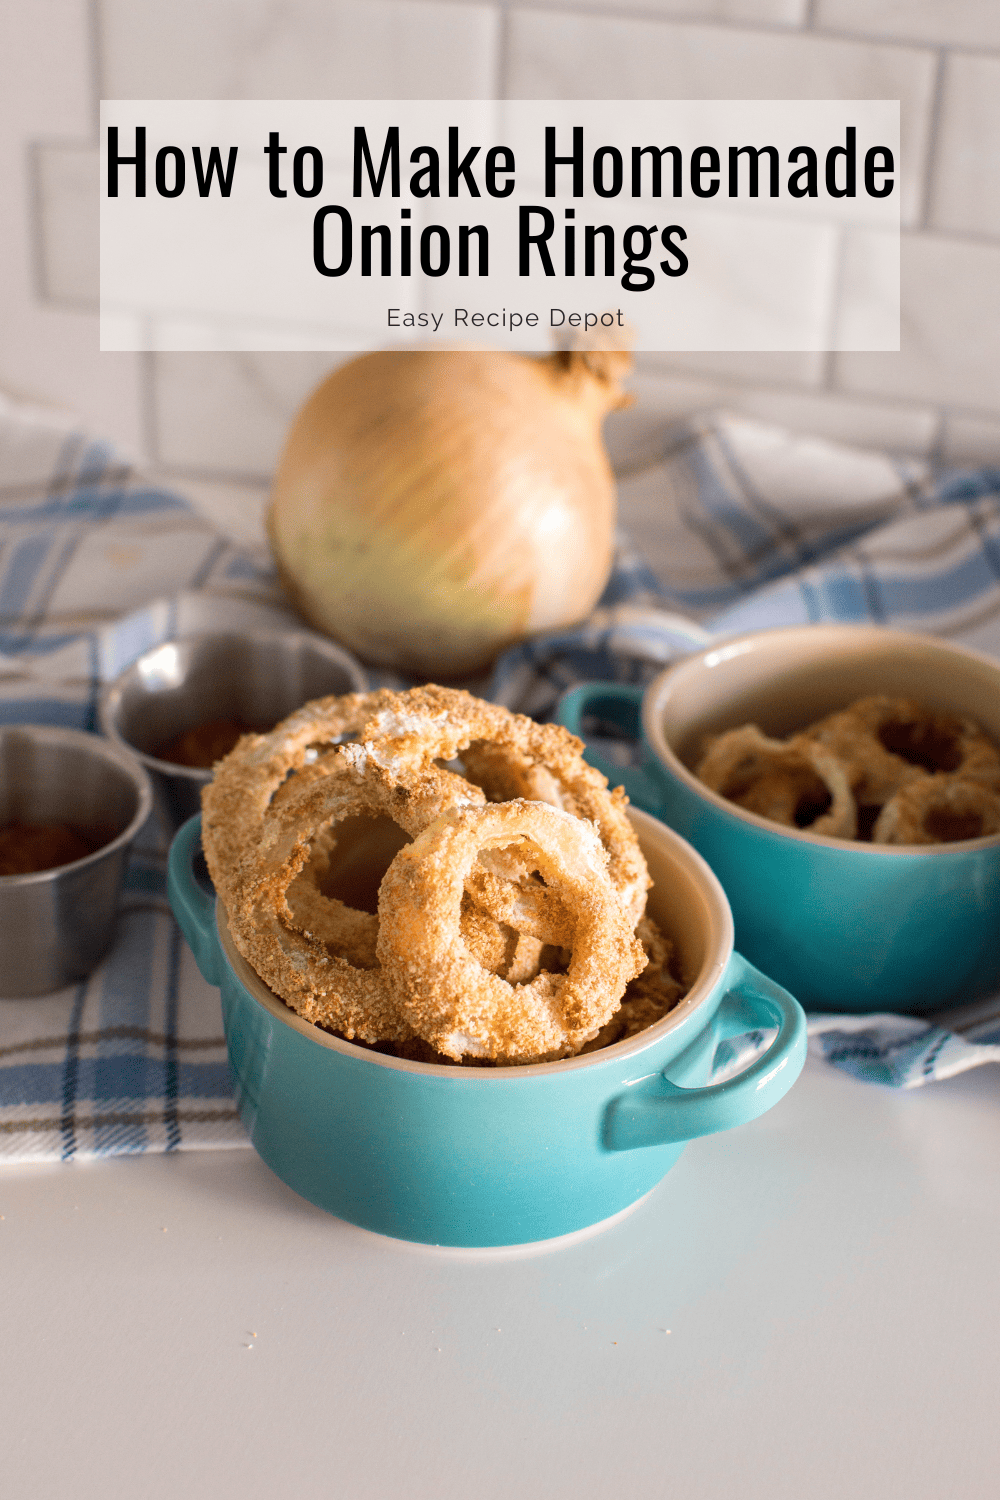 Homemade air fryer onion rings in turquoise bowls, surrounded by ketchup and a plaid tea towel